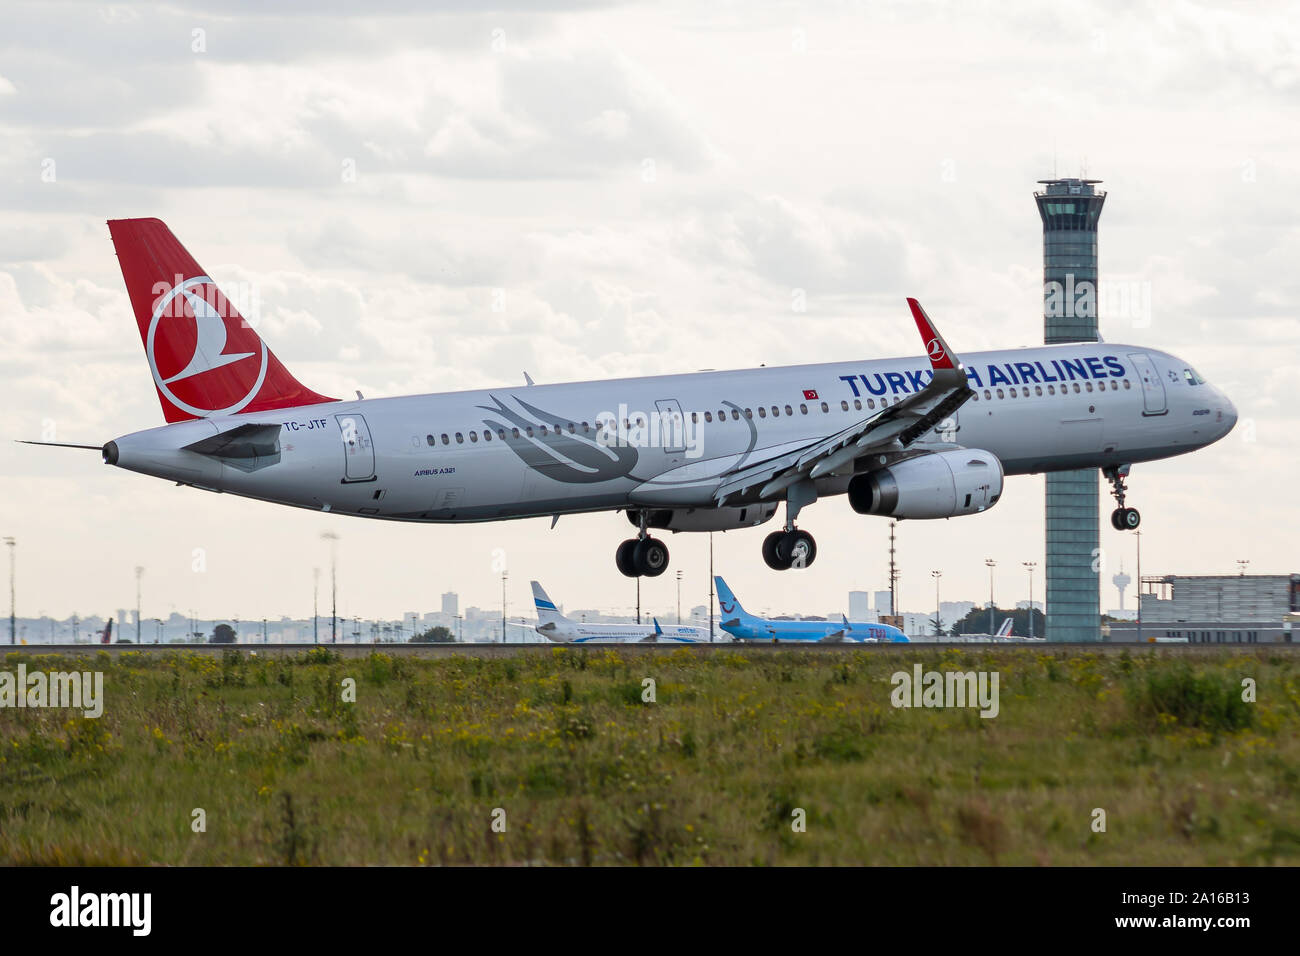 TC-JTF, 23 September 2019, Airbus A321-231-6987 landing at Paris Roissy  airport at the end of Turkish Airlines TK1825 flight from Istanbul Stock Photo